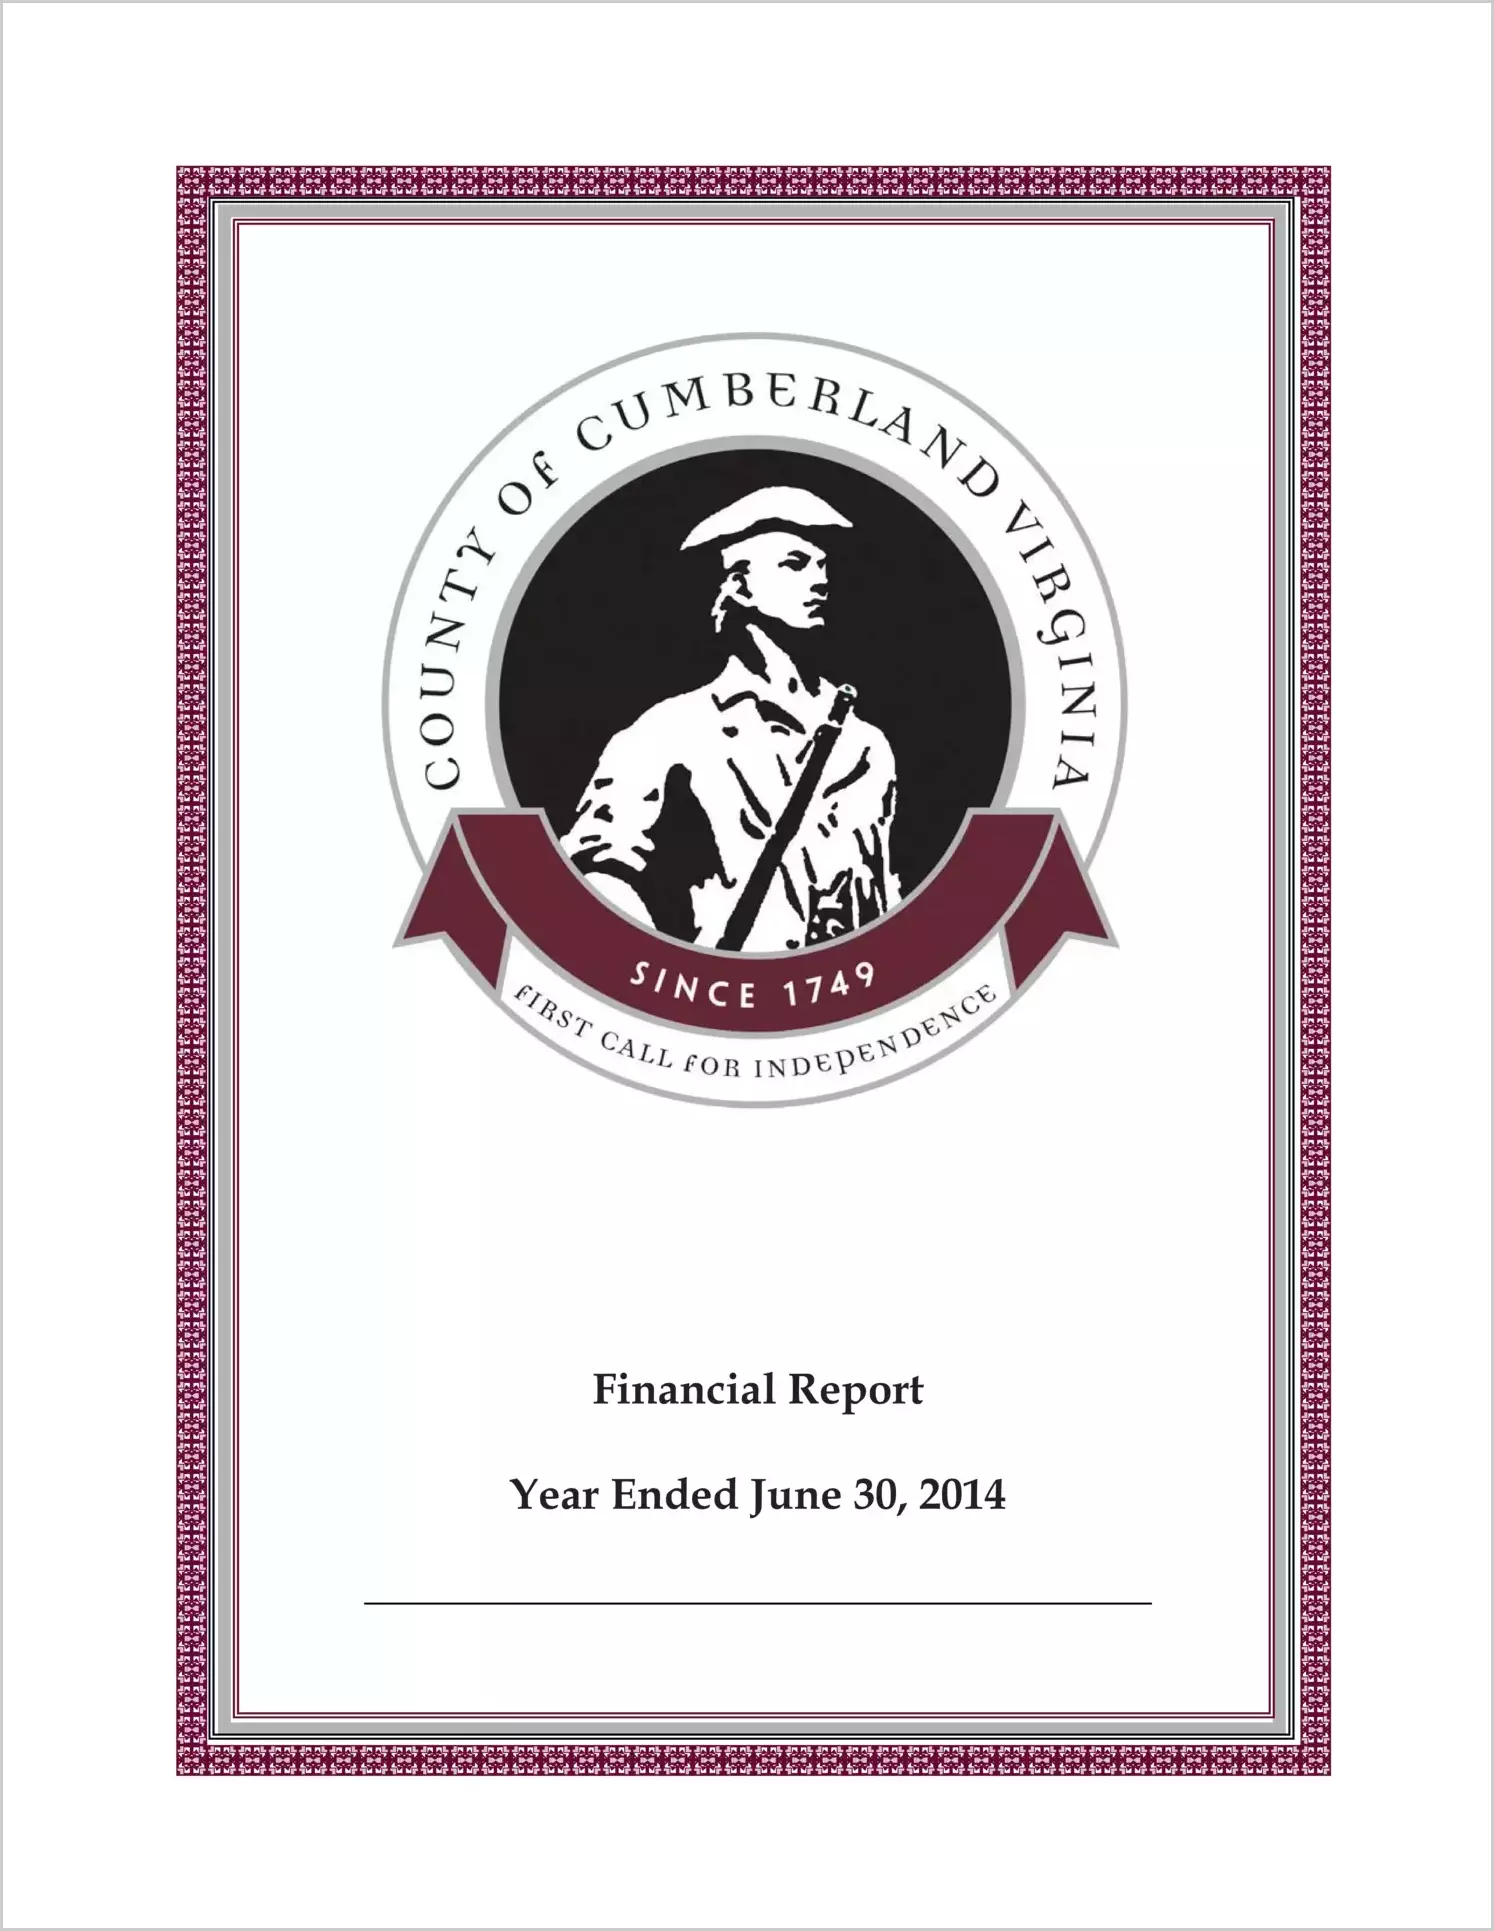 2014 Annual Financial Report for County of Cumberland